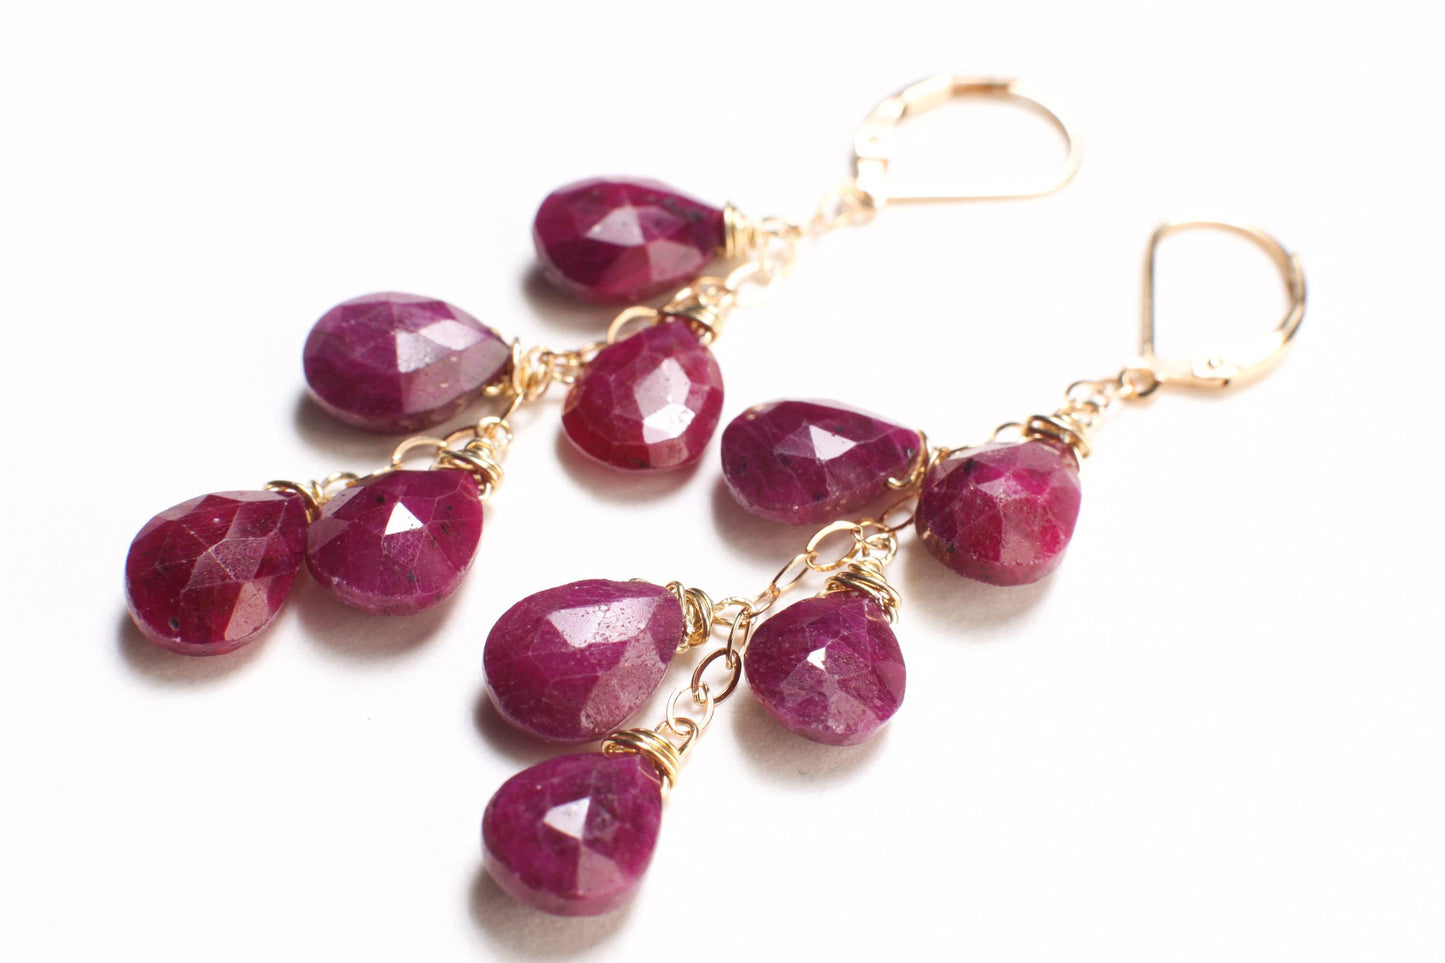 Genuine Ruby faceted 8x11-12mm Tear Drop Cascade 14k Gold Filled Leverback Earrings, Valentine, Bridesmaid, Birthday handmade precious gift.